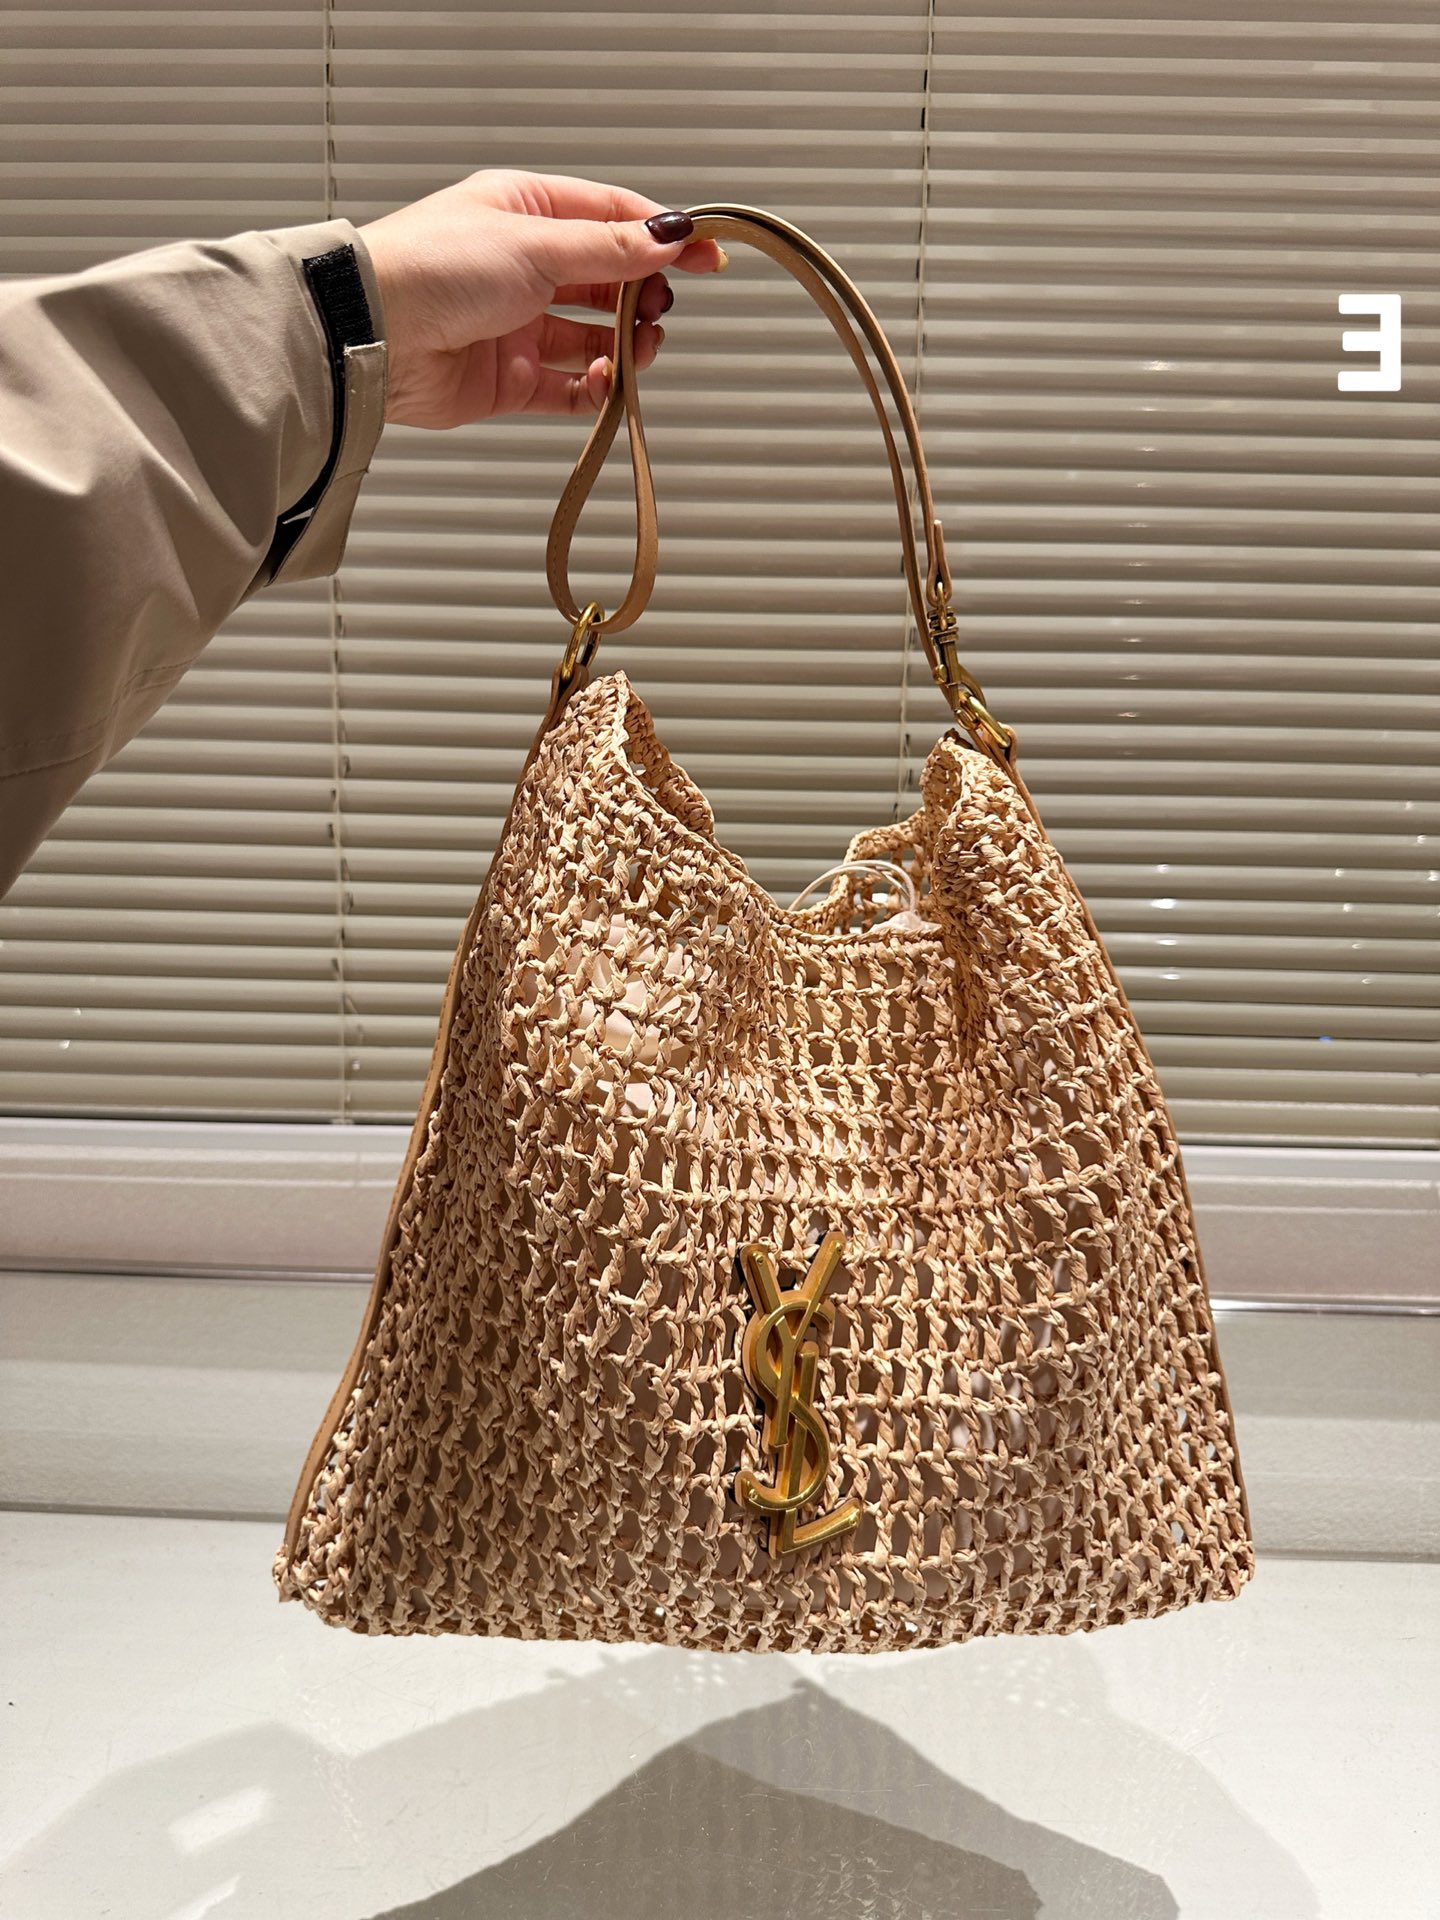 Yves Saint Laurent Tote Bags Weave Straw Woven Casual